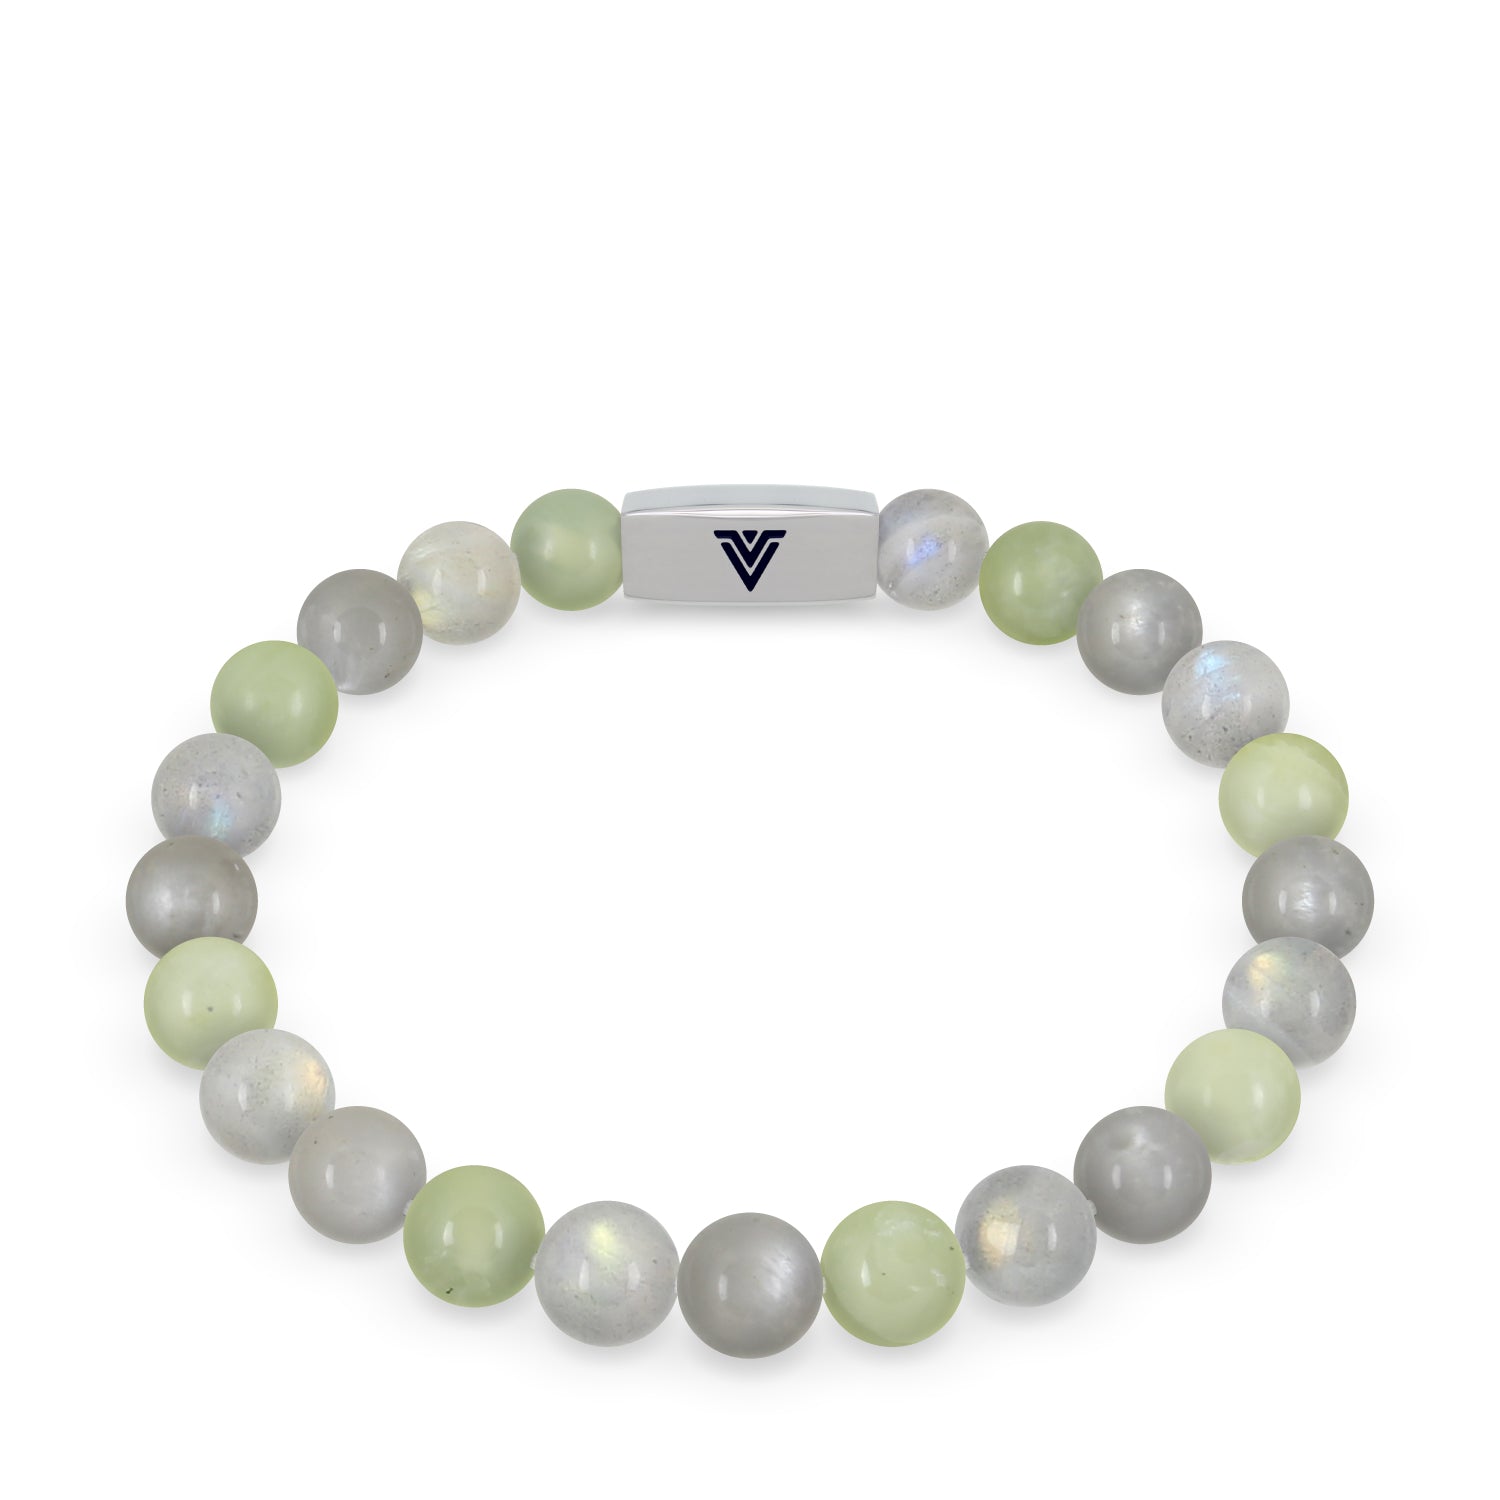 Front view of an 8mm Pisces Zodiac beaded stretch bracelet featuring Jade, Labradorite, & Moonstone crystal and silver stainless steel logo bead made by Voltlin